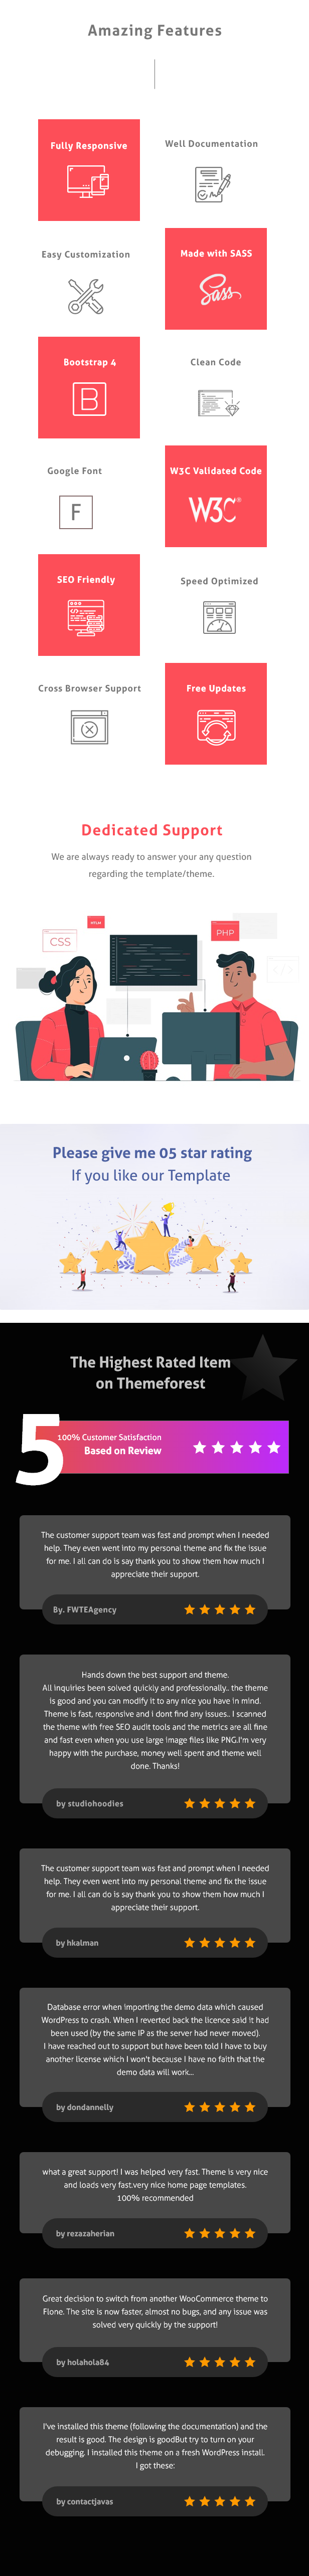 Quicky - Minimal eCommerce HTML Template